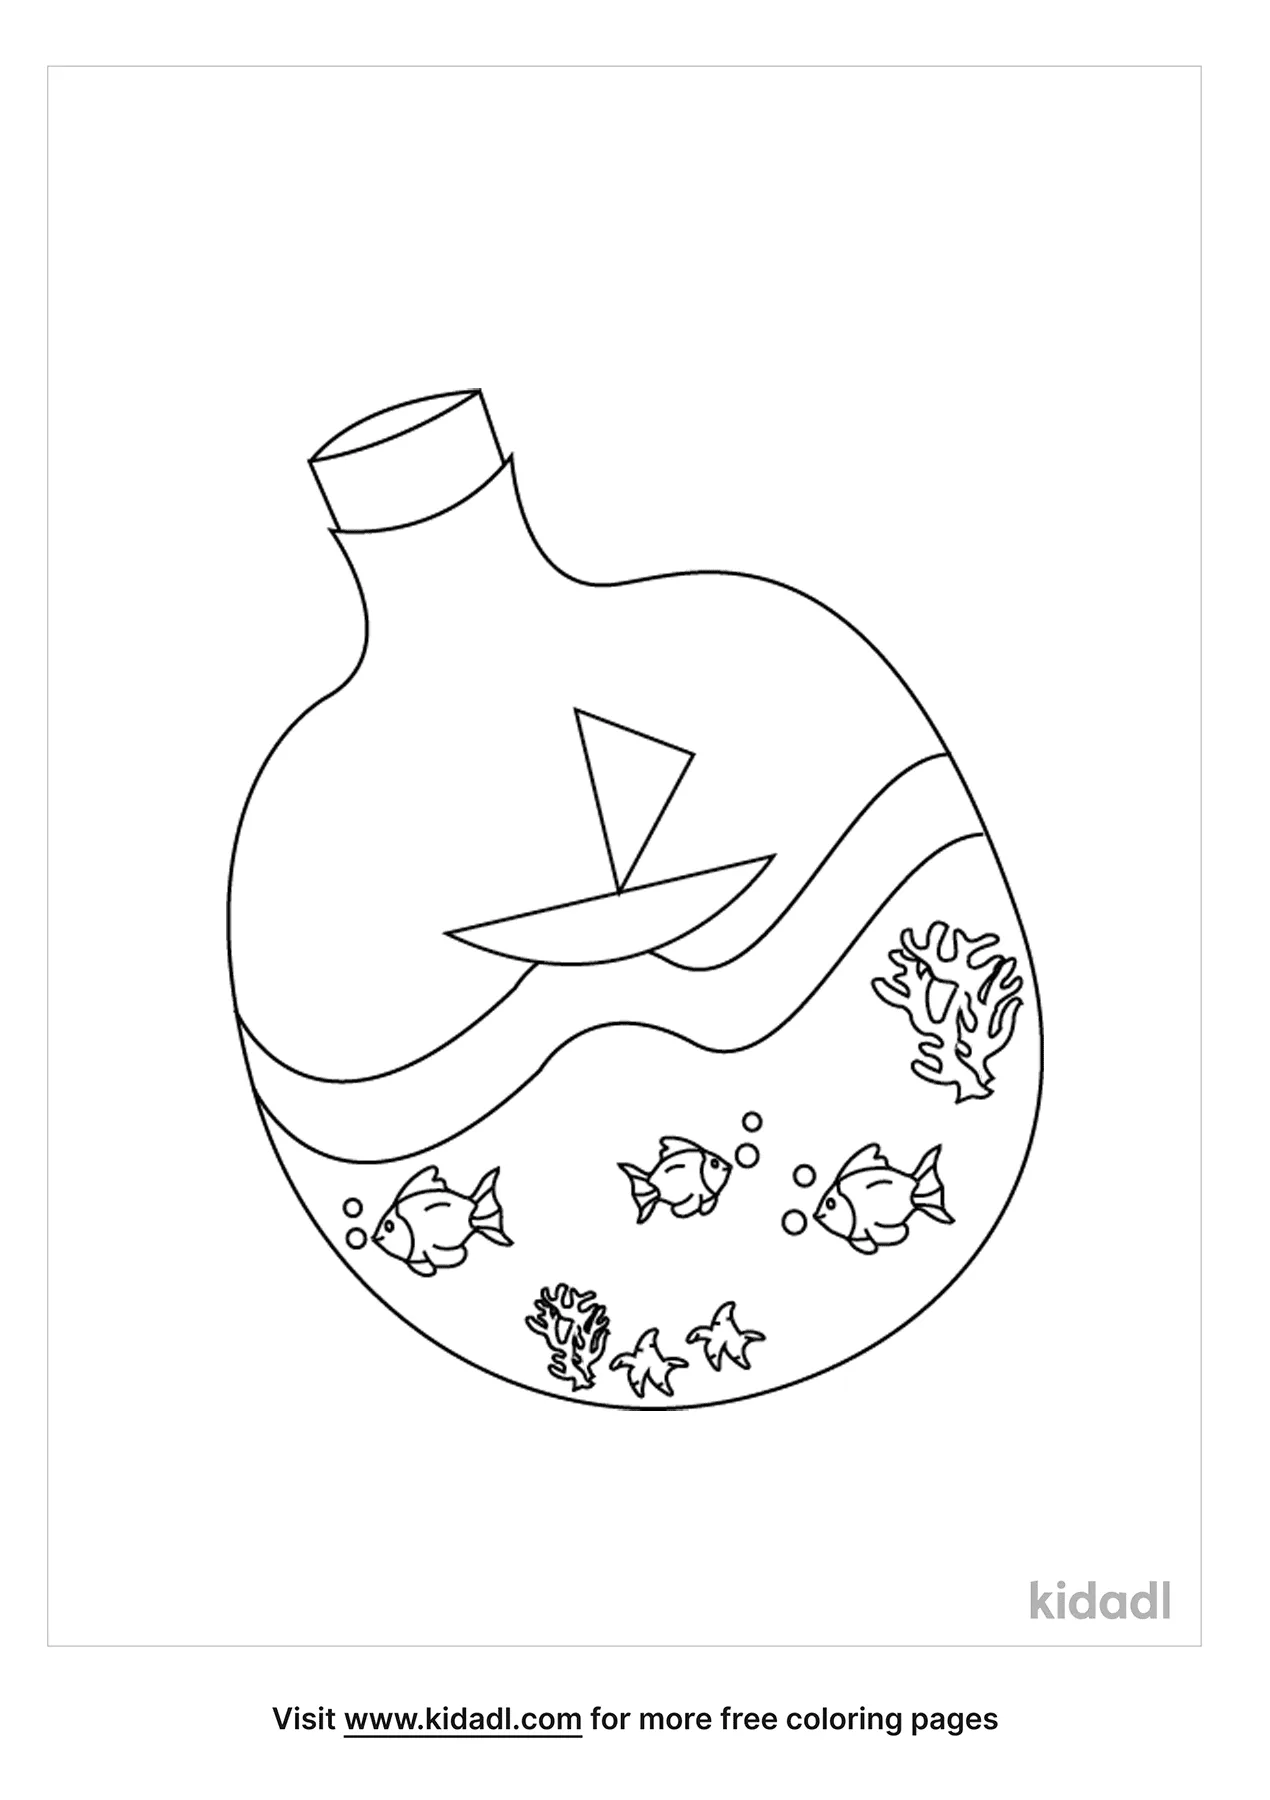 Ocean In A Bottle Coloring Page